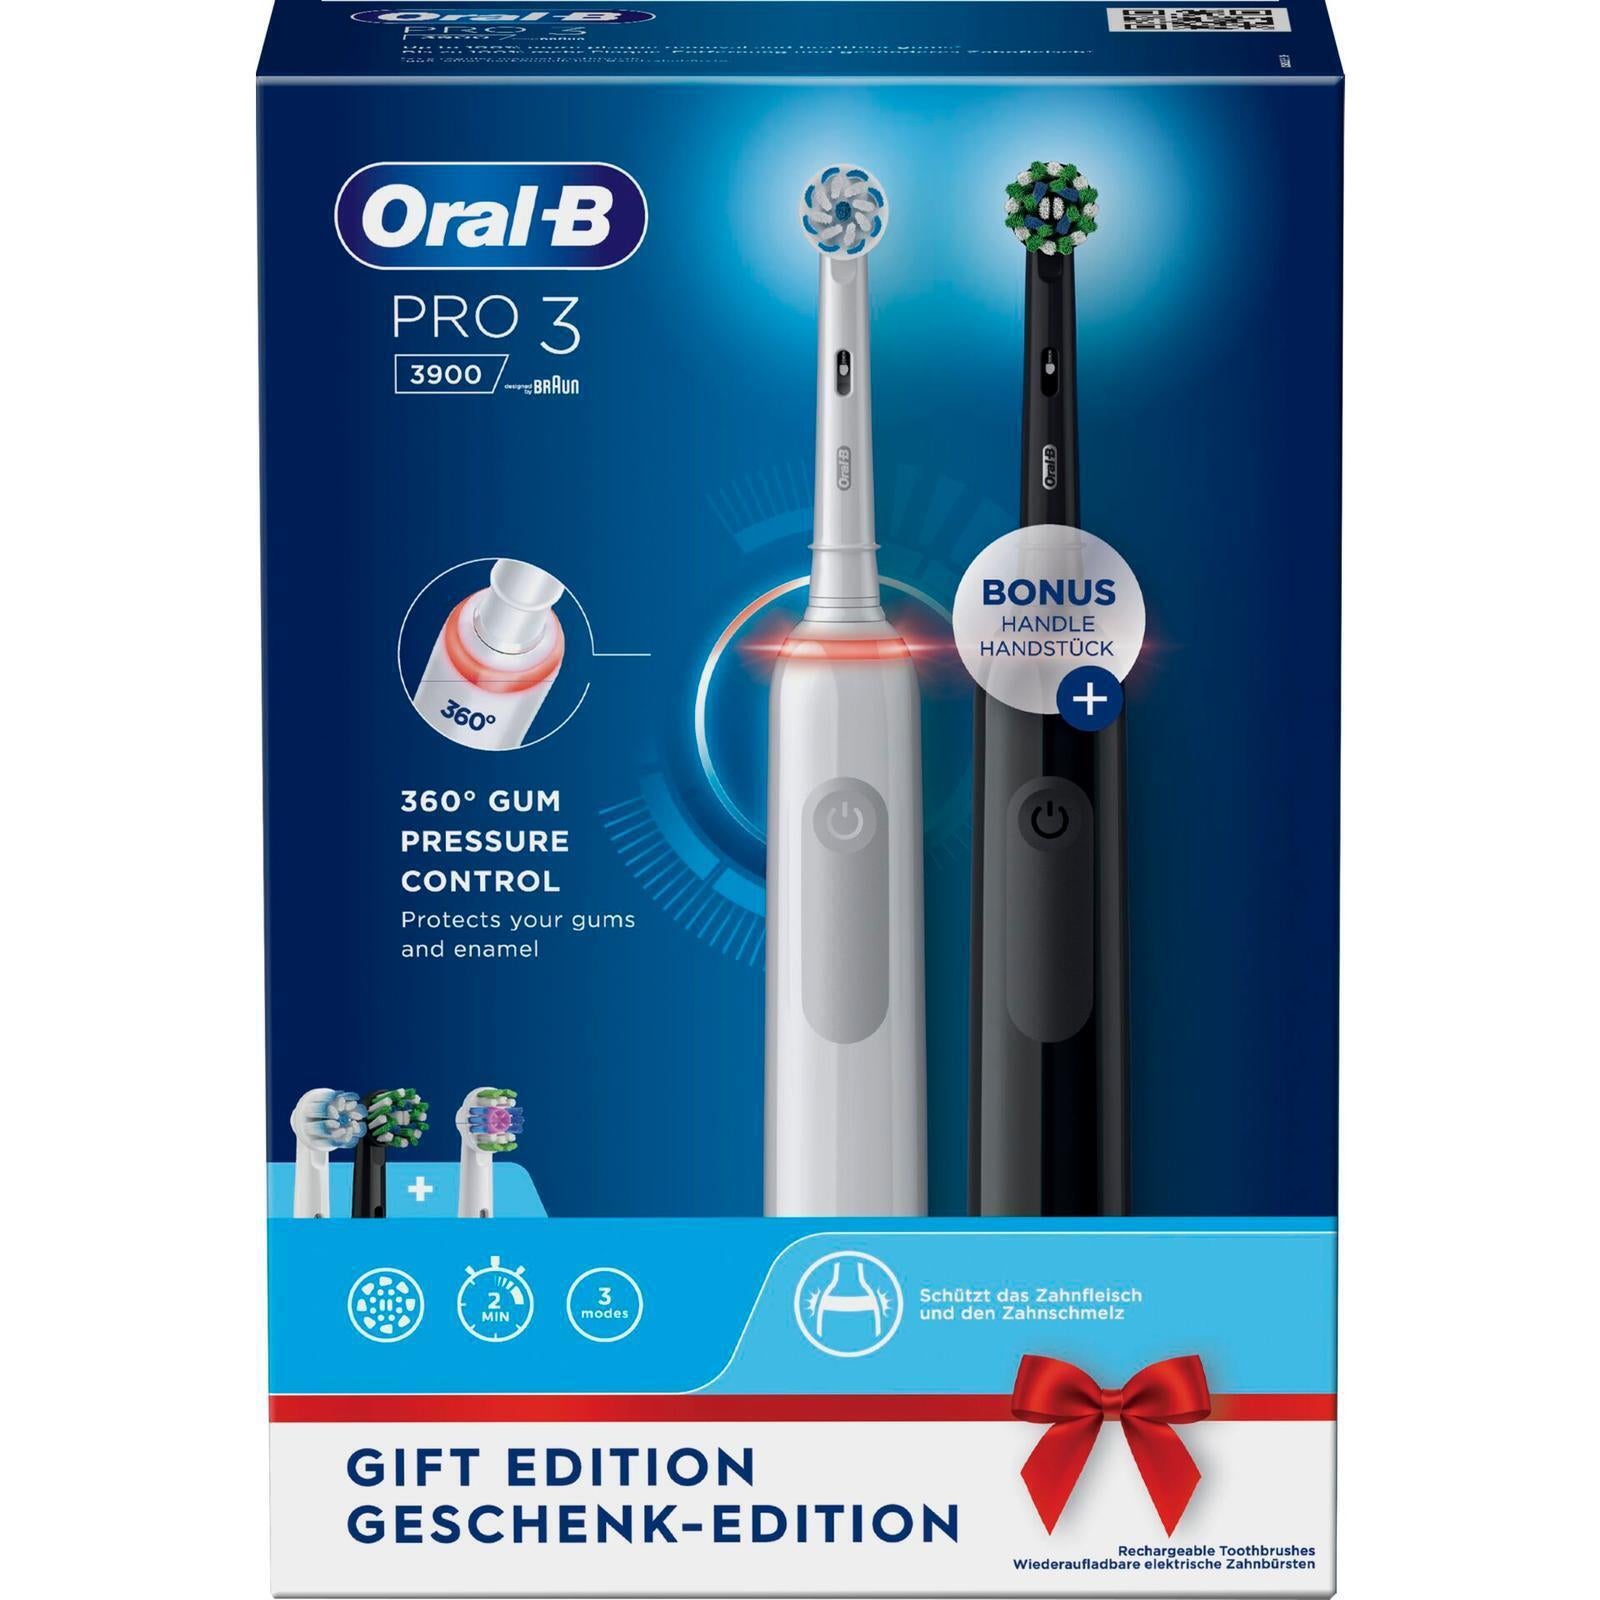 Oral-B Pro 3 - 3900 - Set of 2 Electric Toothbrushes White & Black, 2 Handles with Visible Pressure Sensor, 2 Toothbrush Heads - Healthxpress.ie